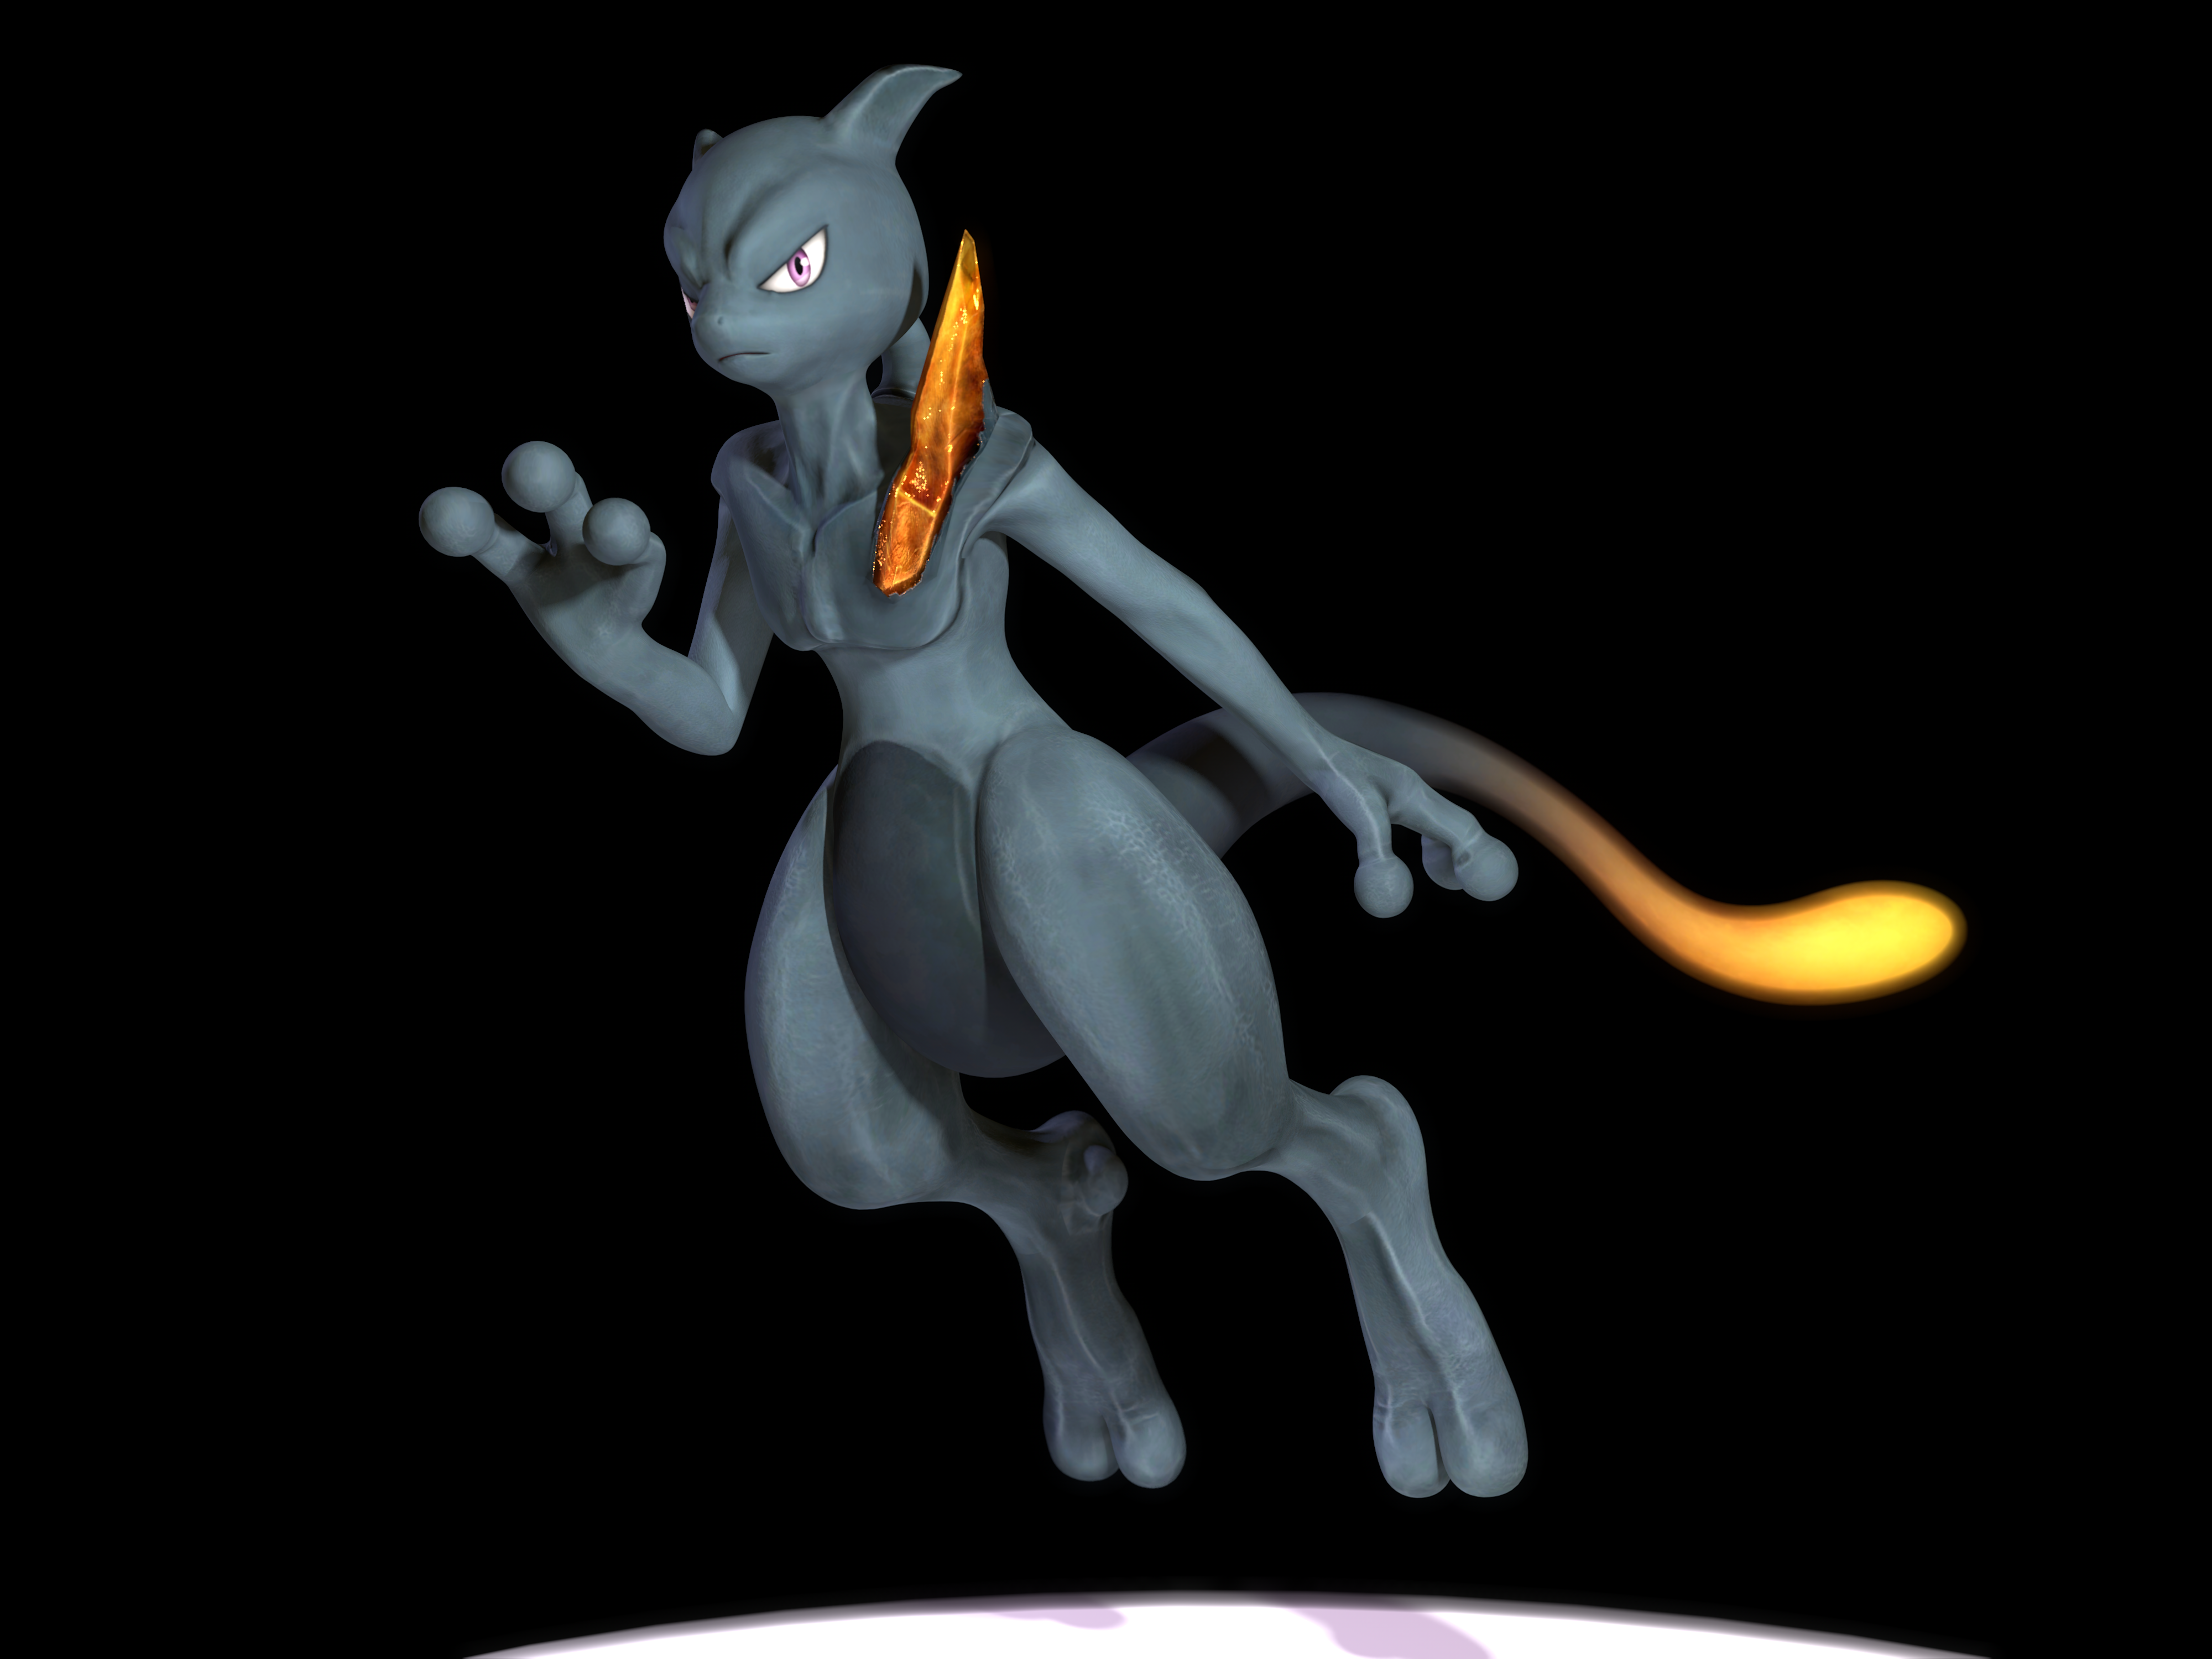 Shadow Mewtwo by Carro1001 on DeviantArt